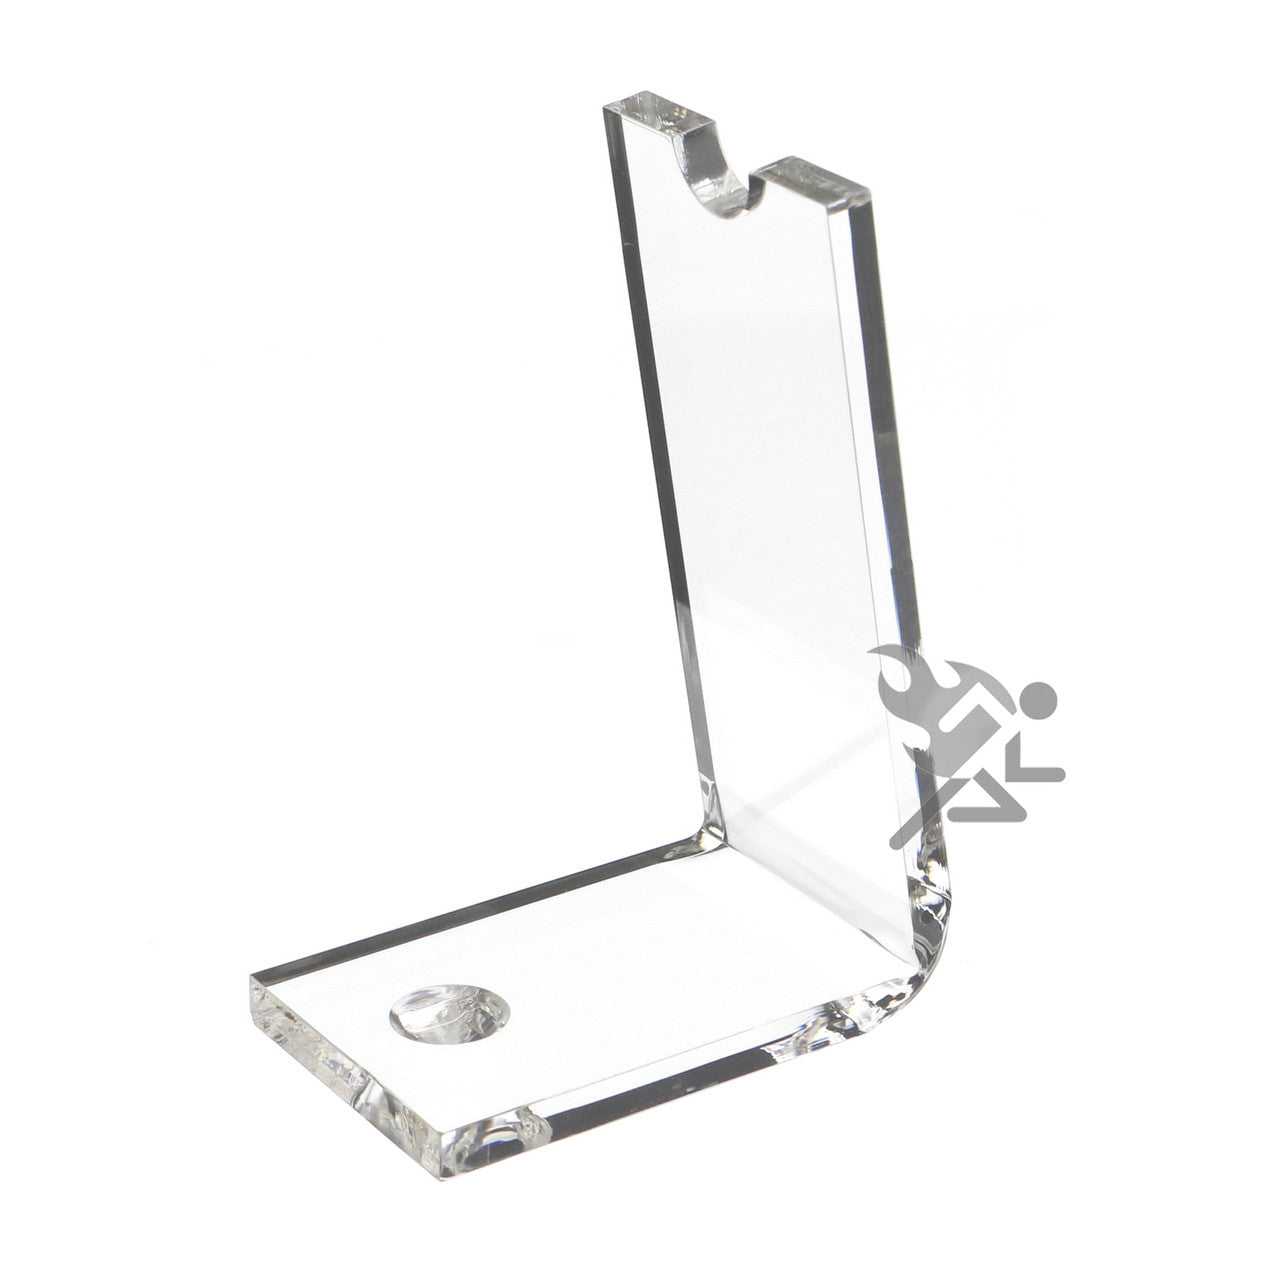  OnFireGuy Heavy Duty Plate Display Stand